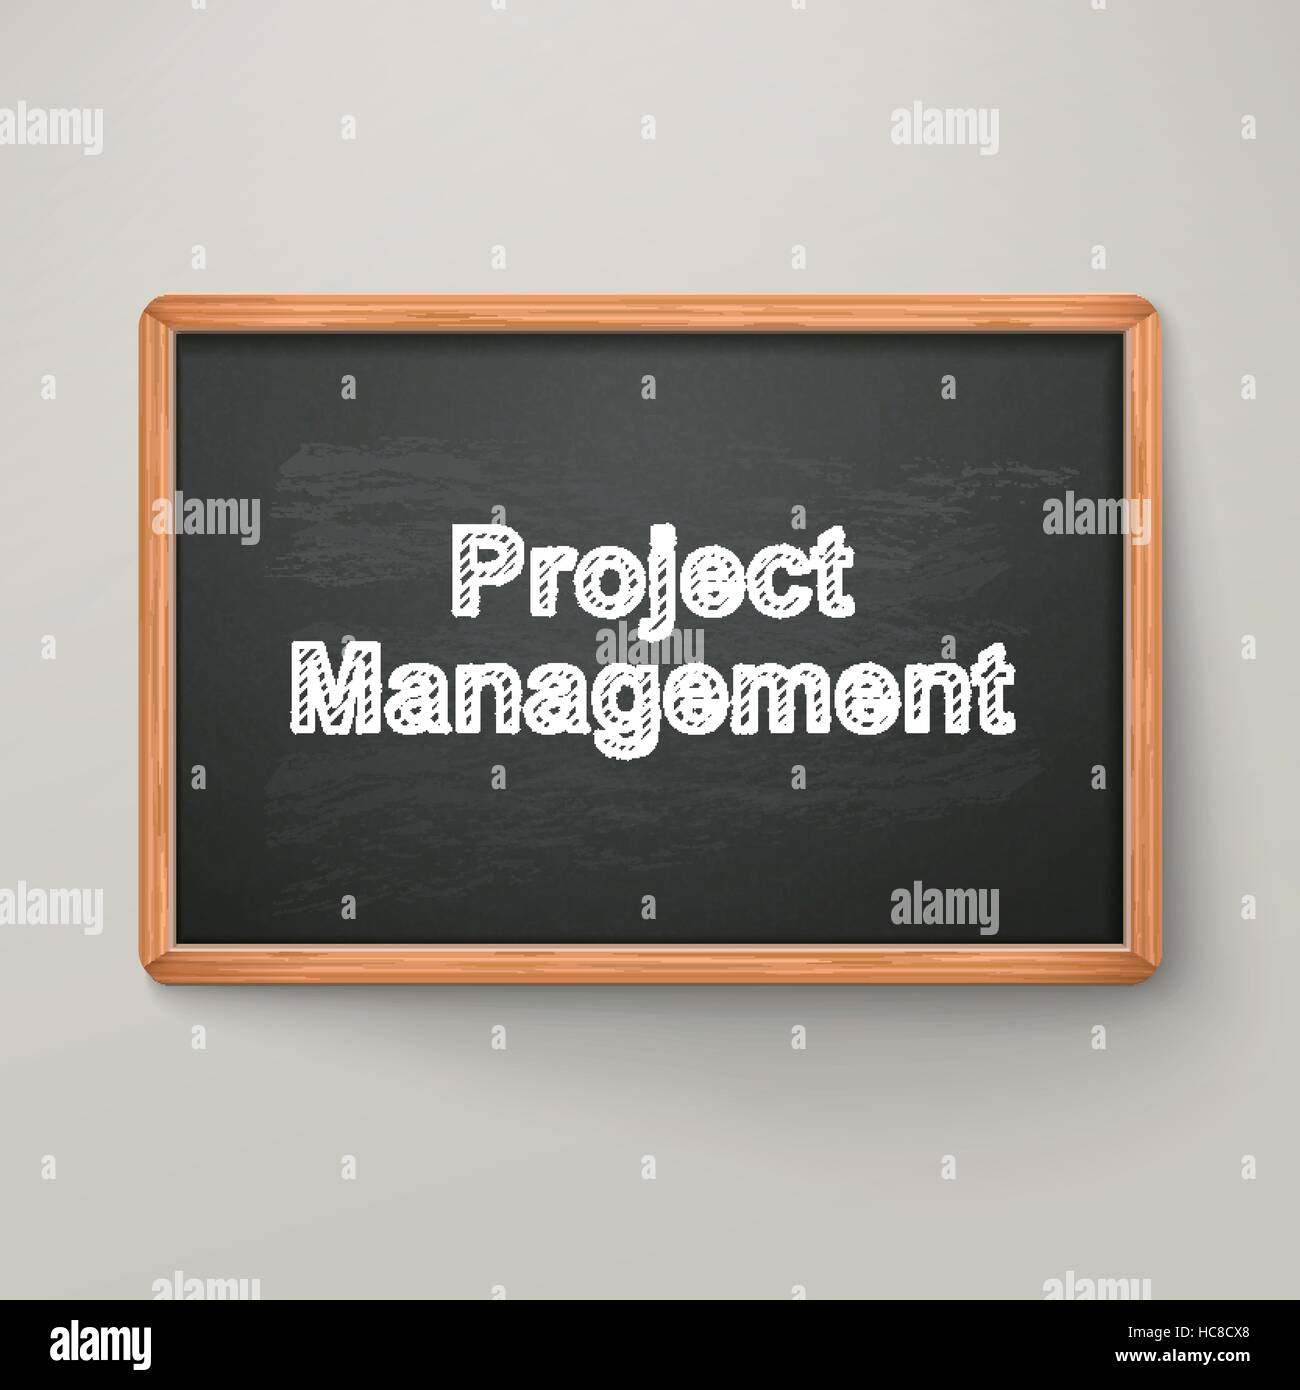 project management on blackboard in wooden frame isolated over grey Stock Vector